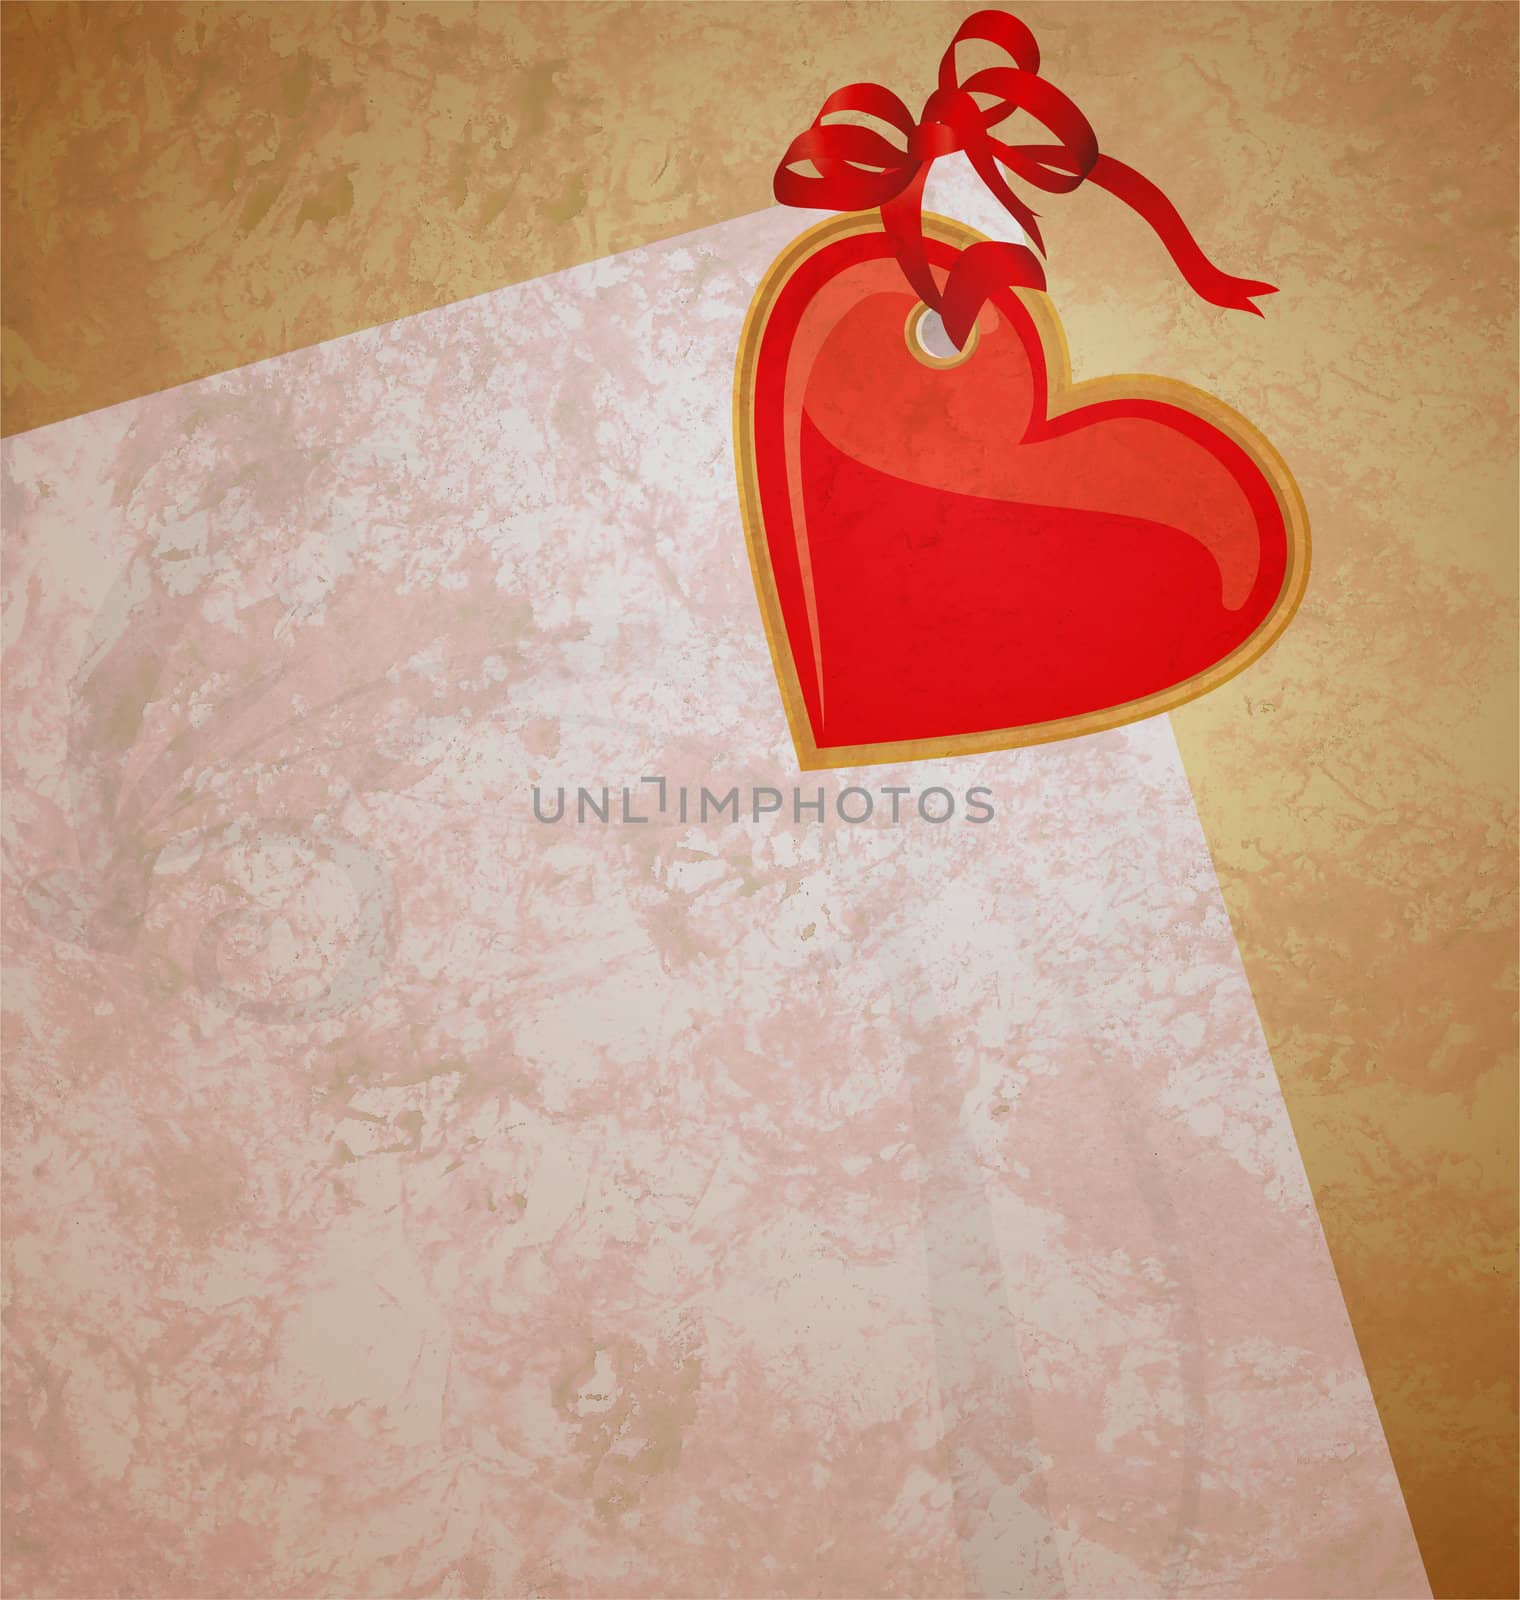 red heart wintage xtyle valentines day illustration for love, romance and wedding